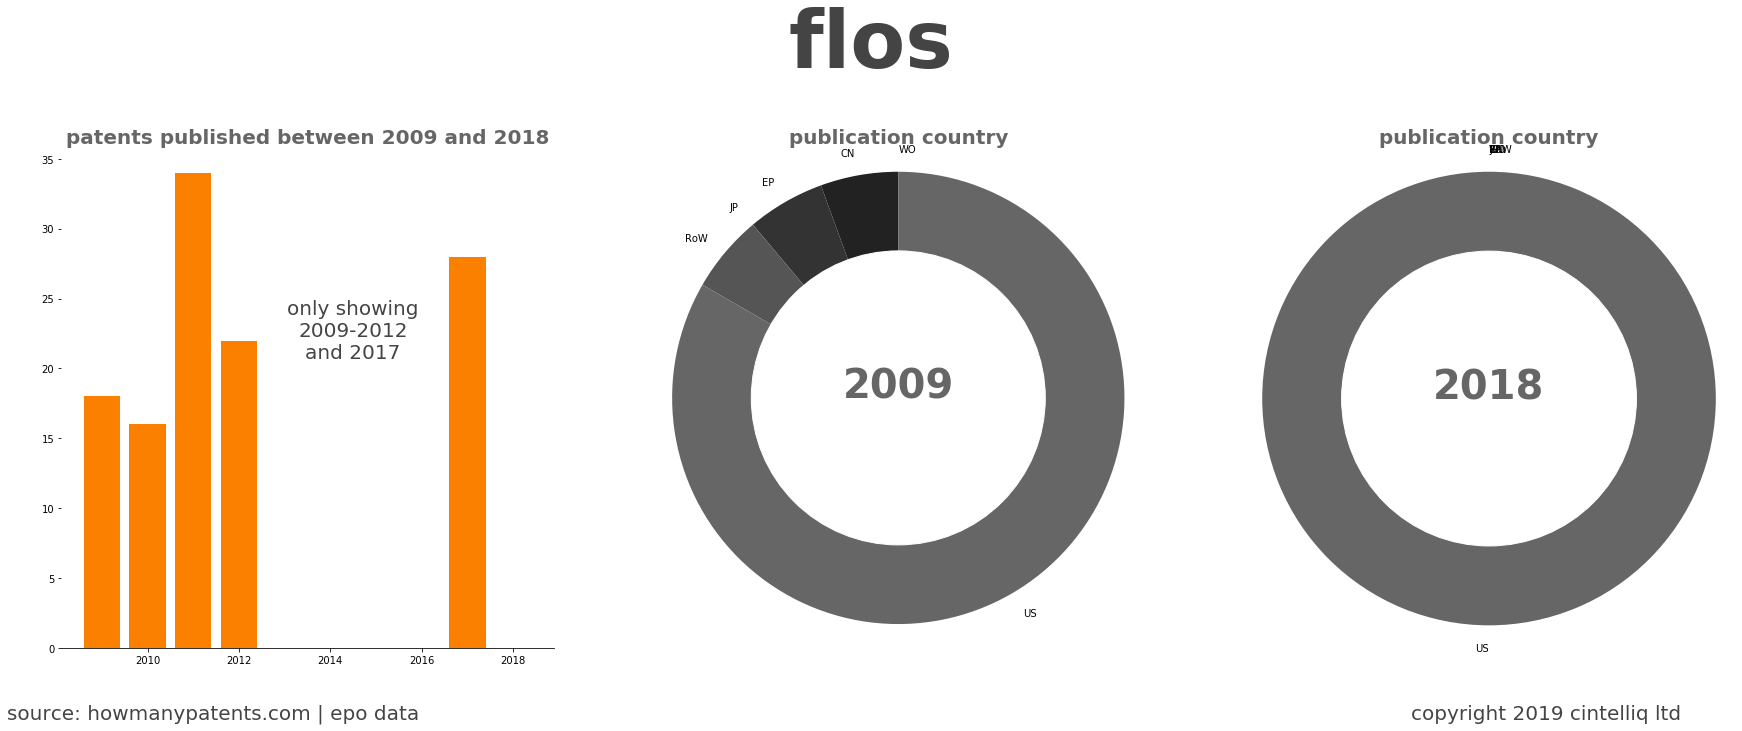 summary of patents for Flos